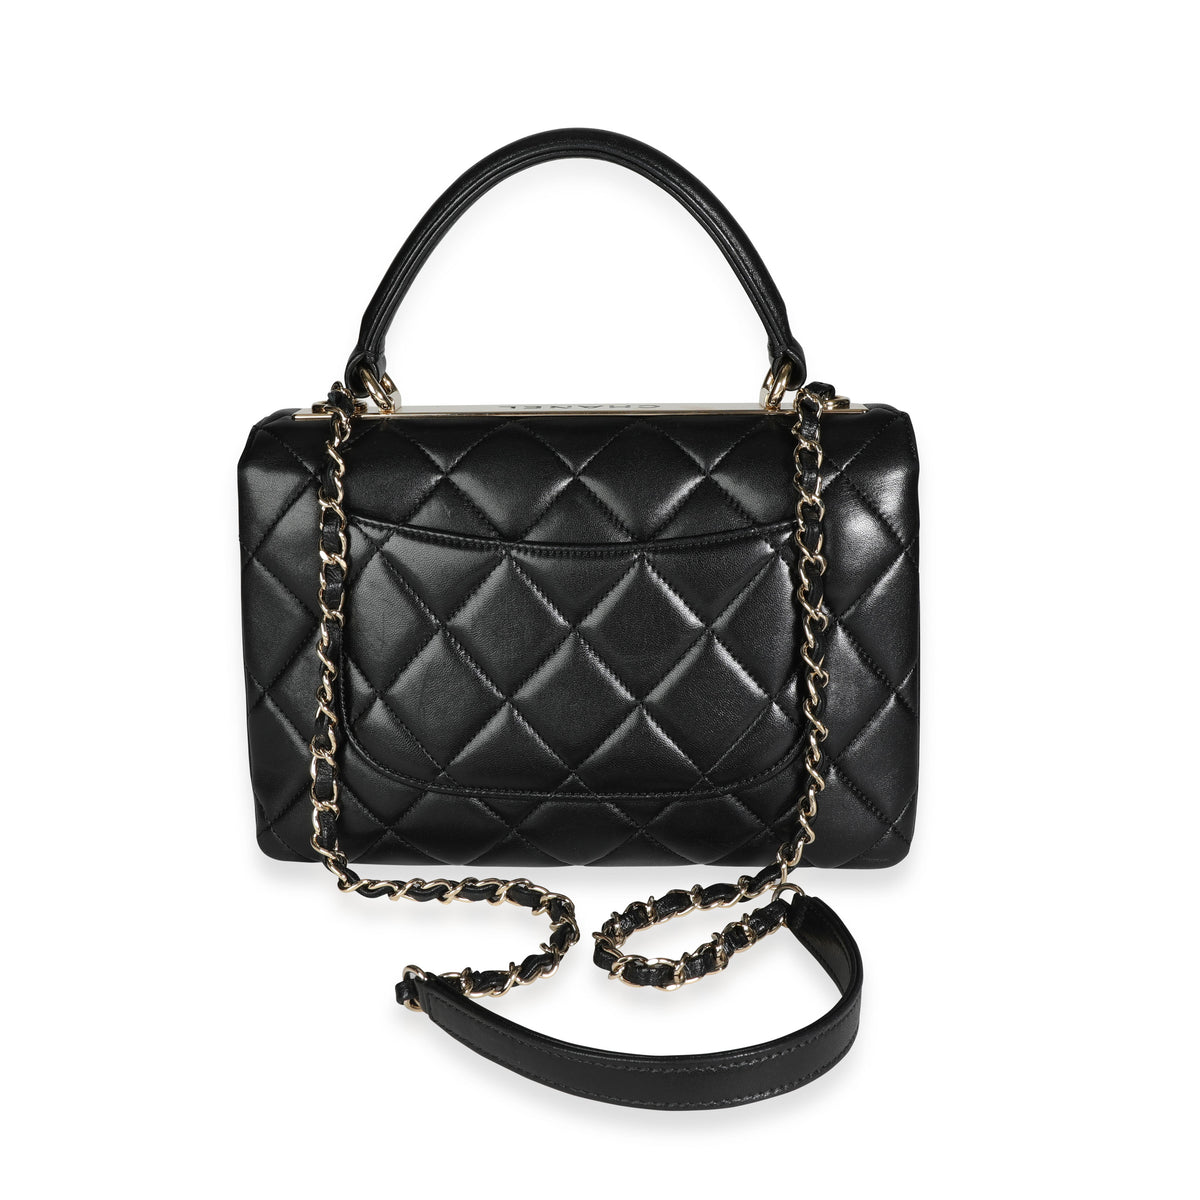 Chanel Black Quilted Lambskin Trendy CC Top Handle Flap Bag